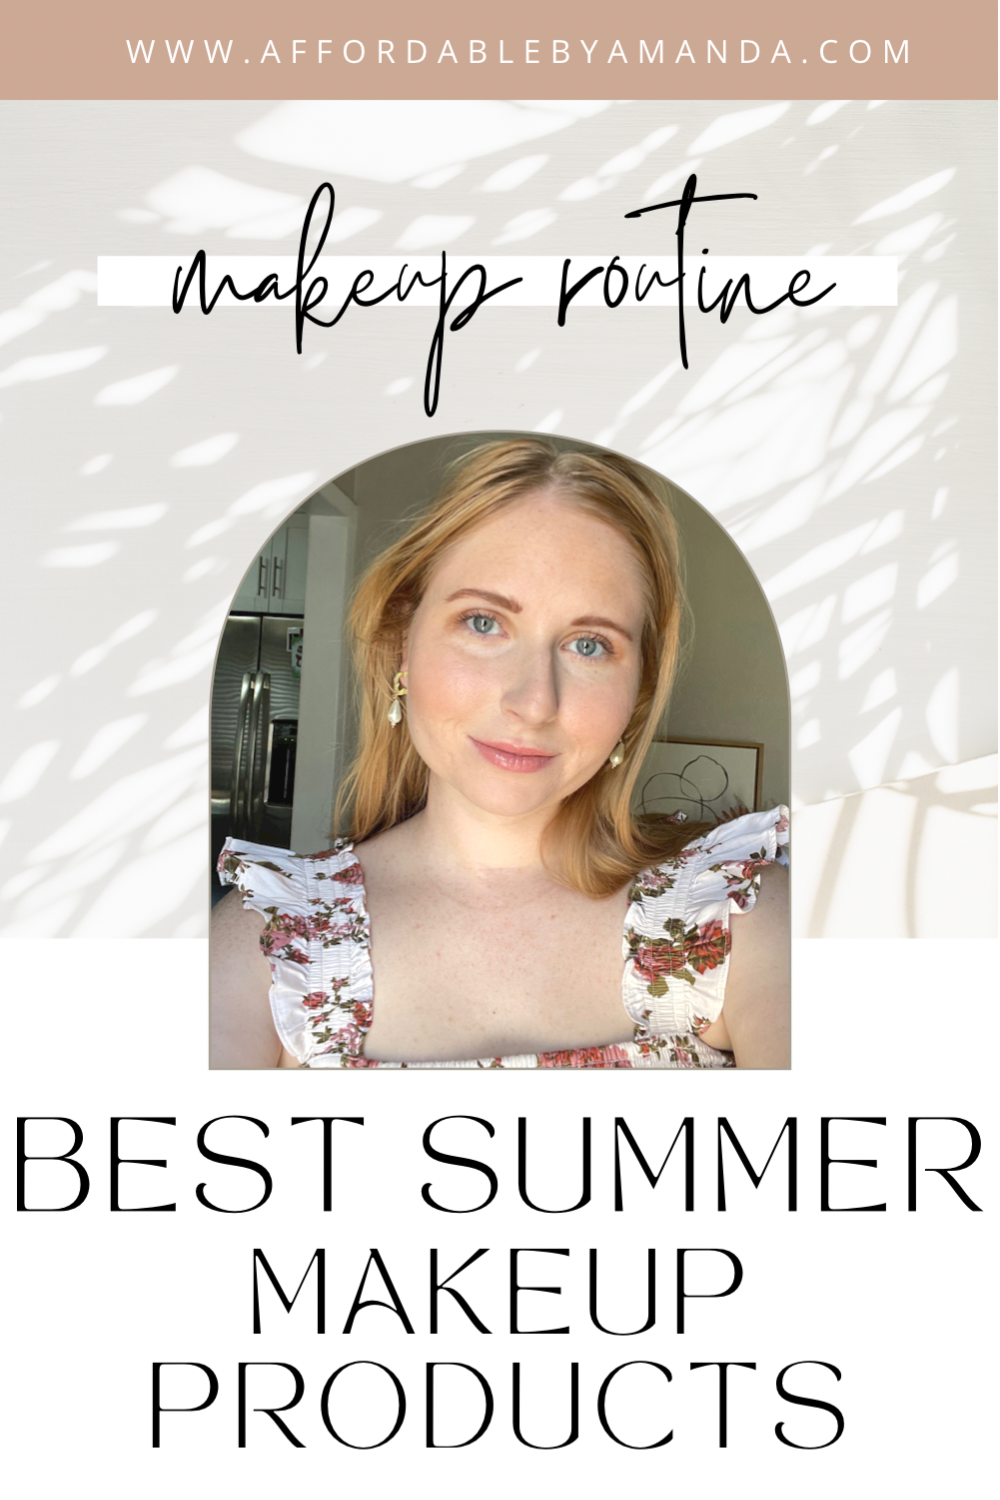 Best Summer Makeup Products 2022 - Affordable by Amanda 